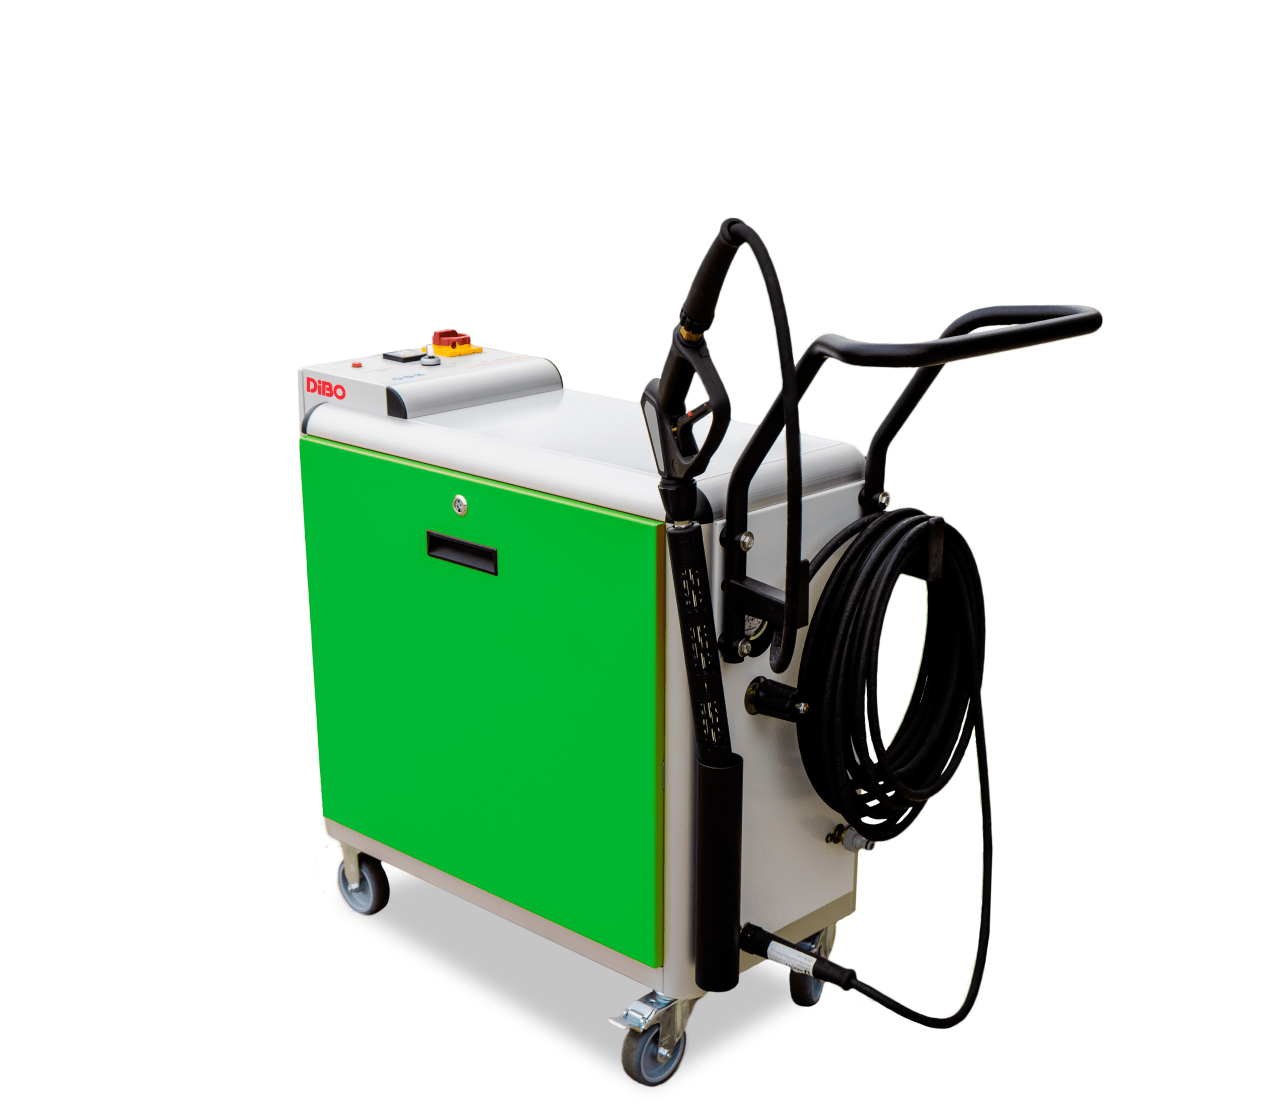 DiBO STM-M 170-4 mobile eco-friendly all-electric steam/high-pressure cleaner with adjustable temperature and pressure